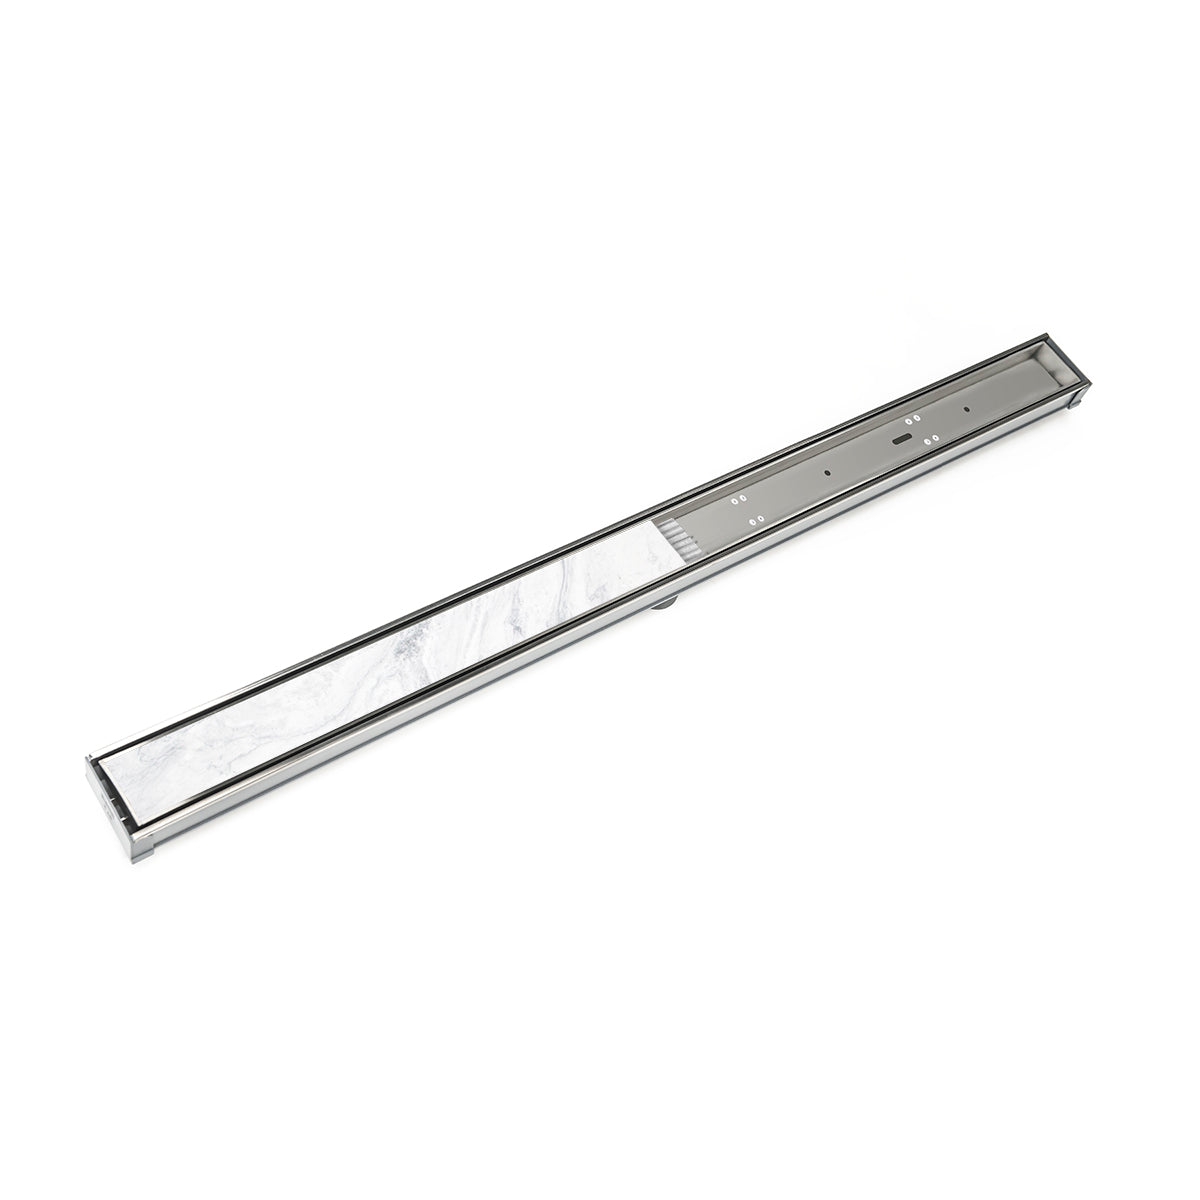 Infinity Drain 72" S-PVC Series Low Profile Site Sizable Linear Drain Kit with 2 1/2" Tile Insert Frame